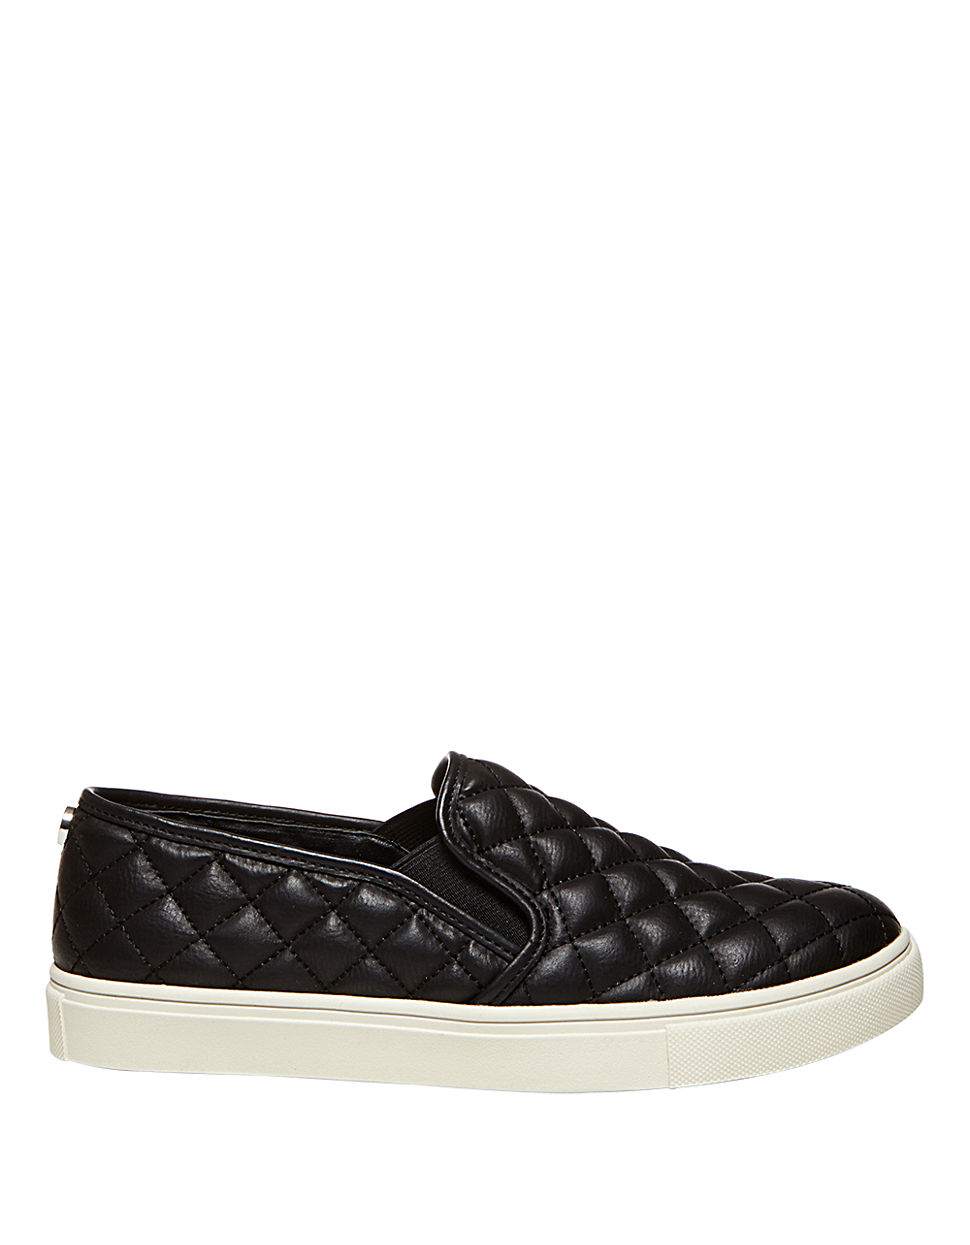 Steve madden Ecentrcq Quilted Faux Leather Slip-ons in Black | Lyst